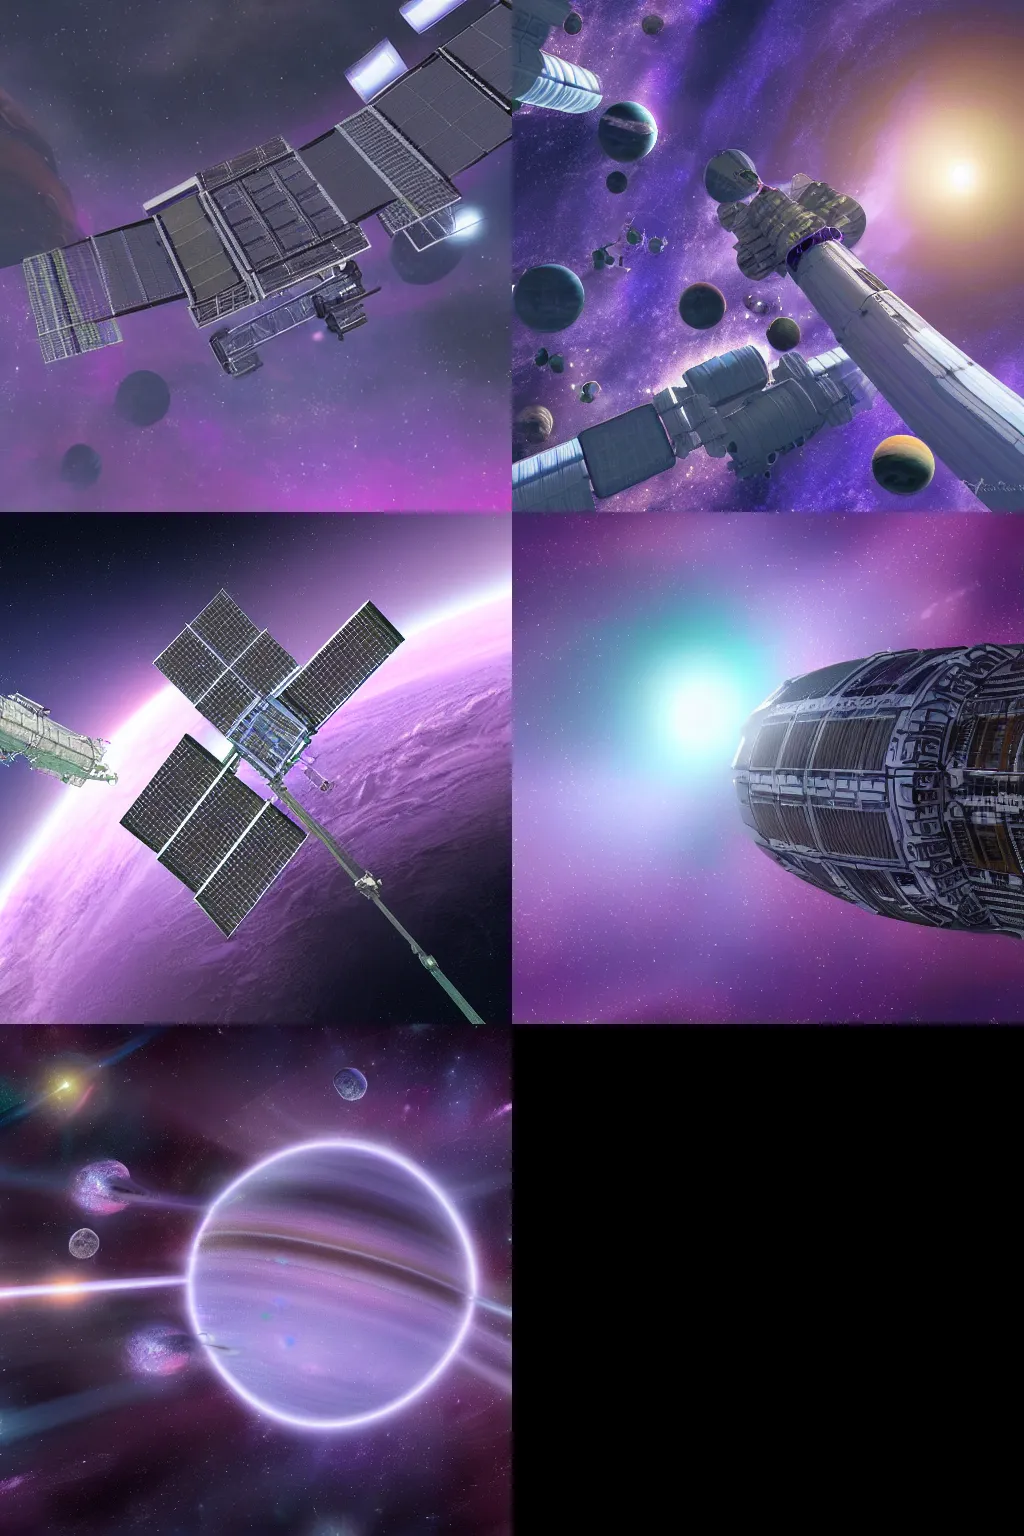 Prompt: digital art of a massive space station near a purple and green planet